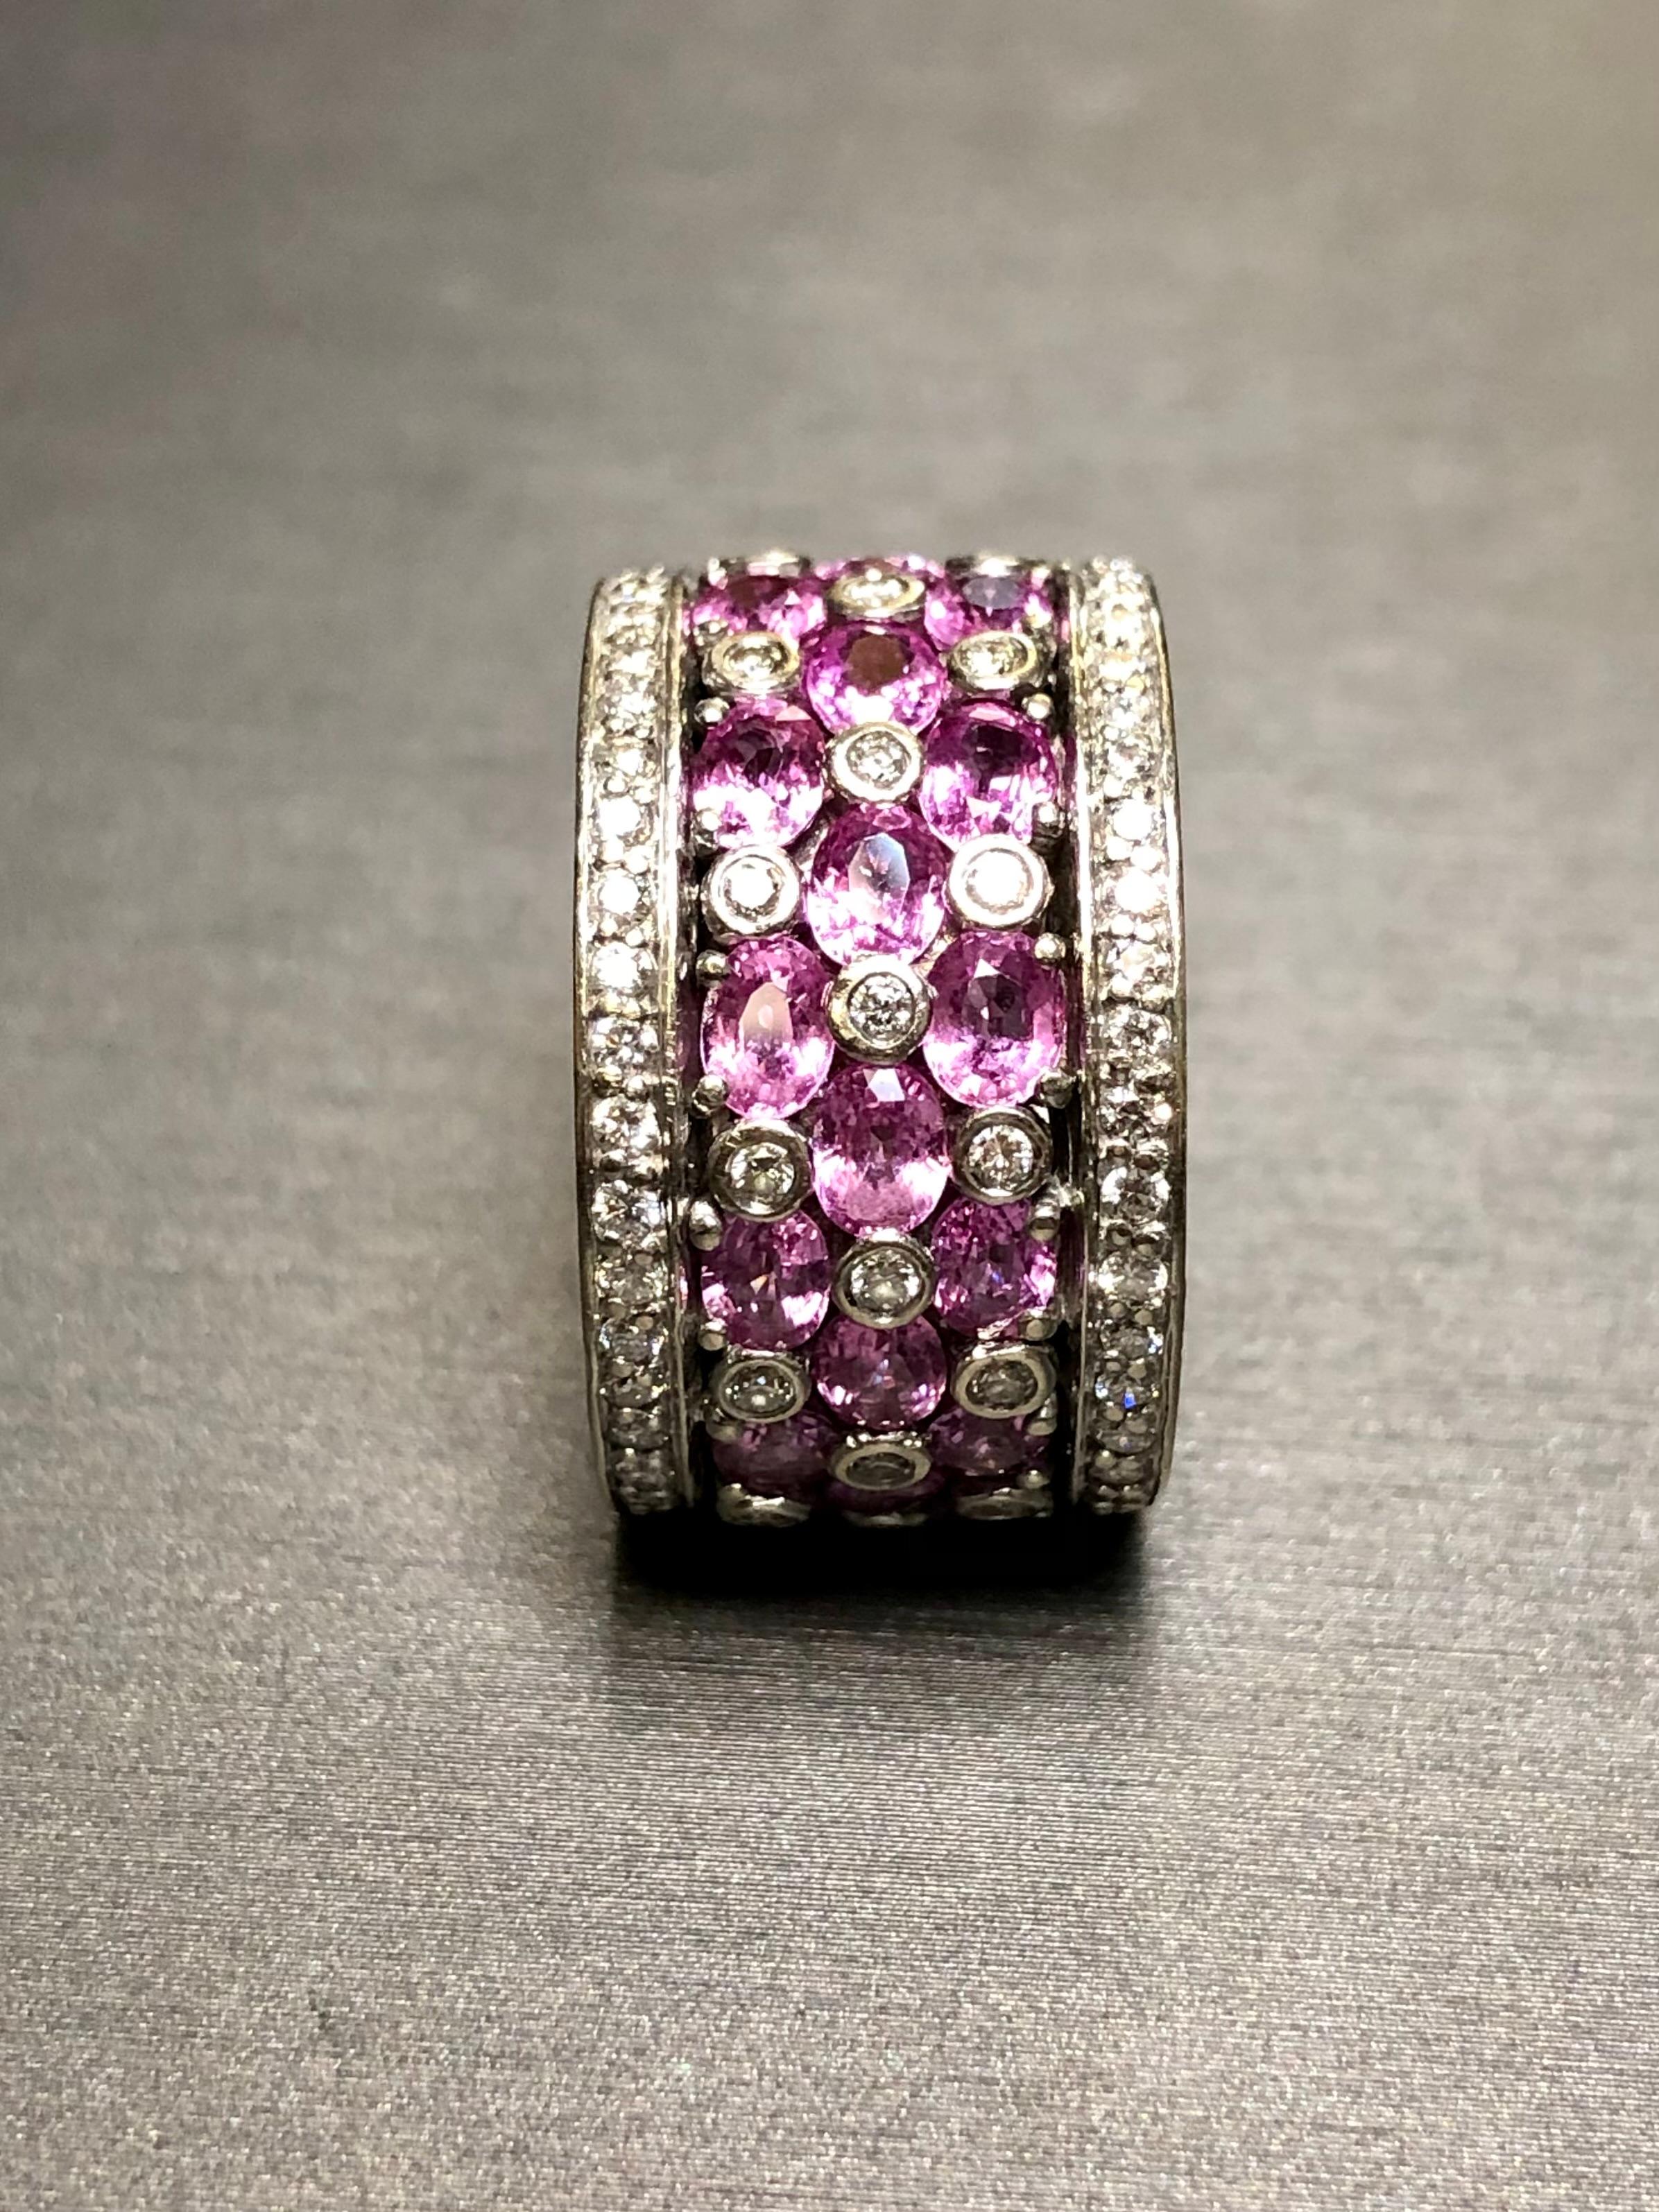 Contemporary Estate 18K Pink Sapphire Diamond Wide Band Cocktail Ring 10.86cttw Sz 6.25 For Sale